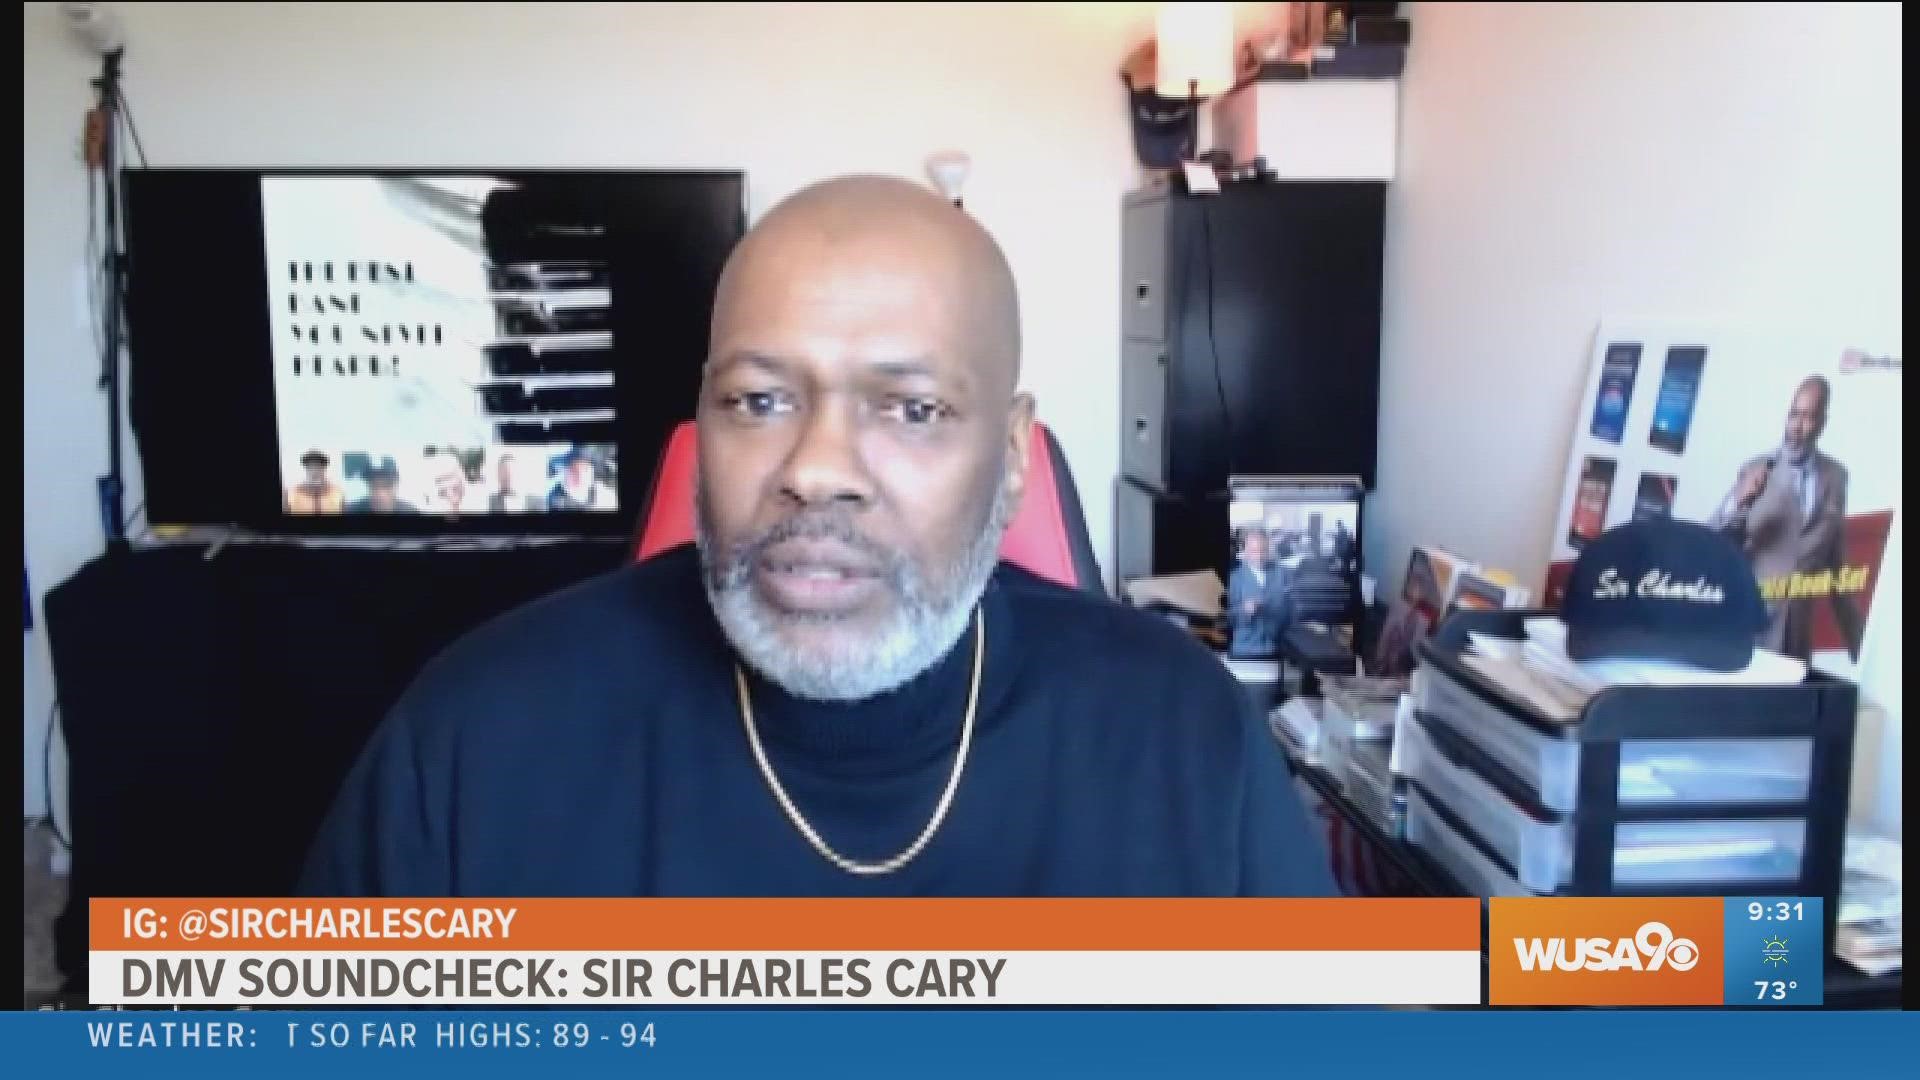 Inspirational Speaker Sir Charles Cary wrote a song that aims to uplift everyone. His single is called, "Who Can Make It Better" featuring Willie Jolley.